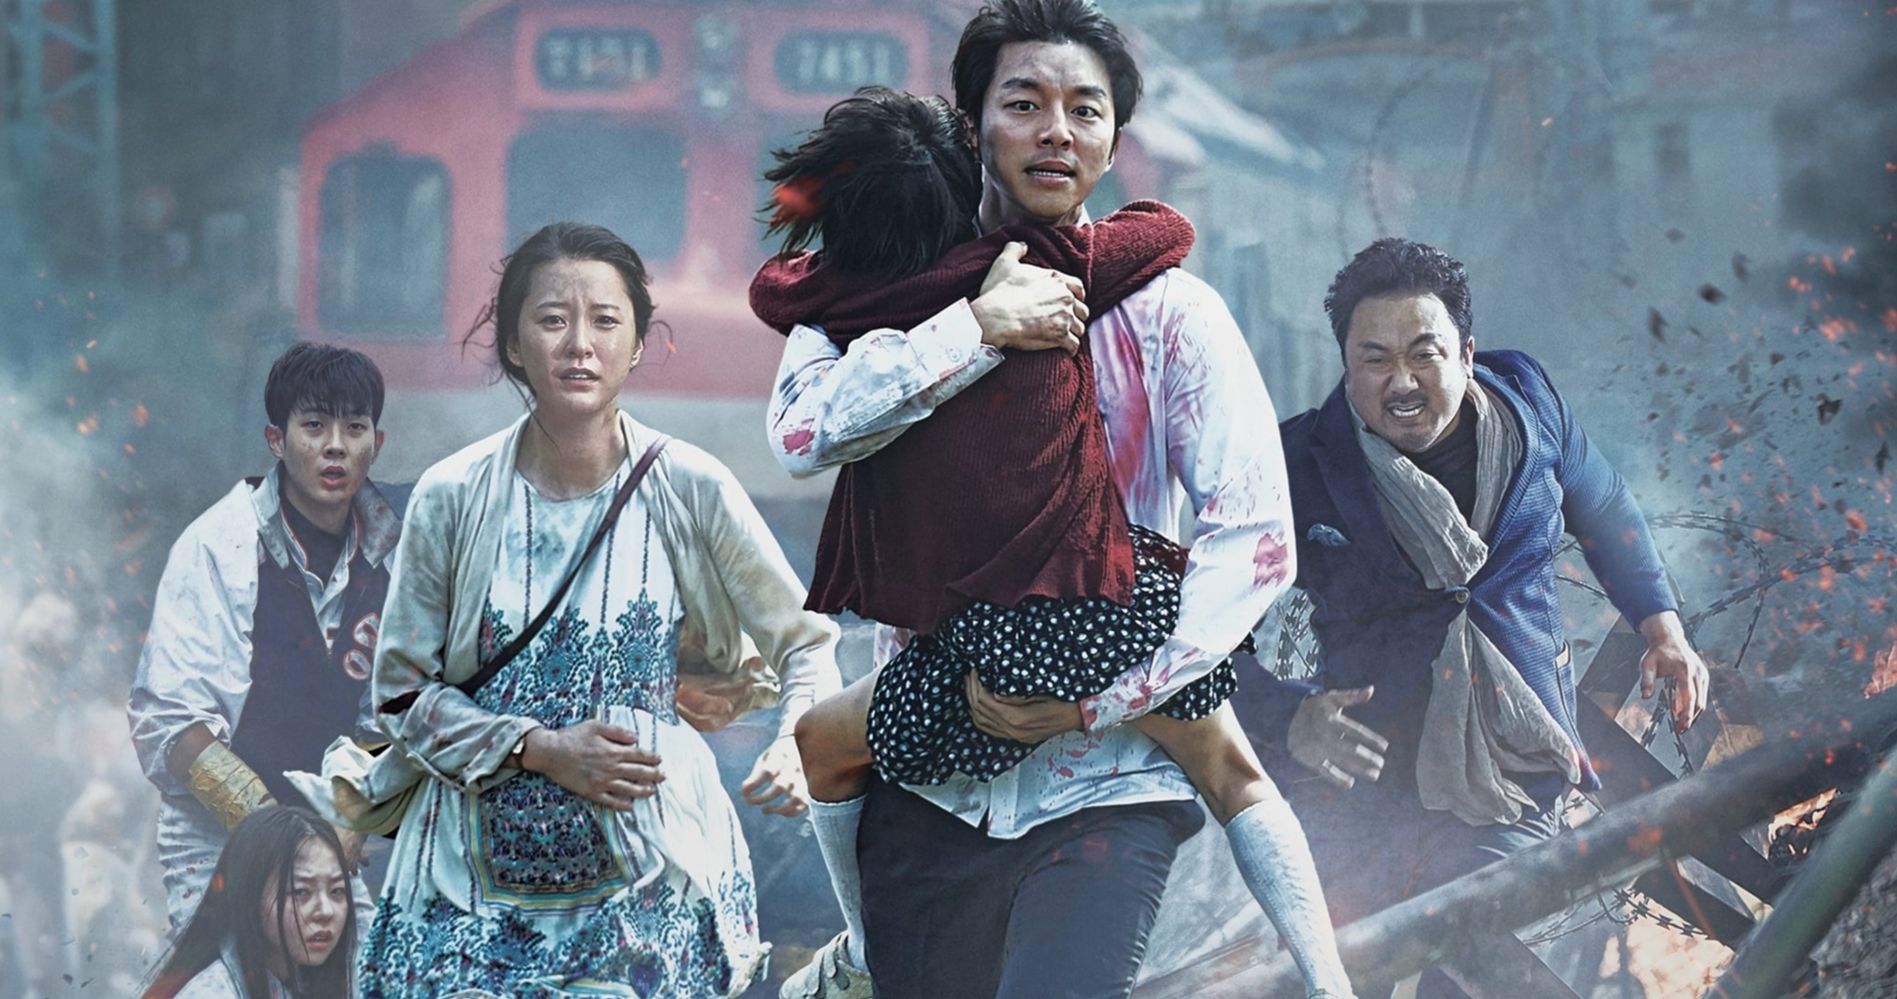 Train to Busan Remake Director Is Ready to 'Rise Above &amp; Beyond' After Intense Backlash